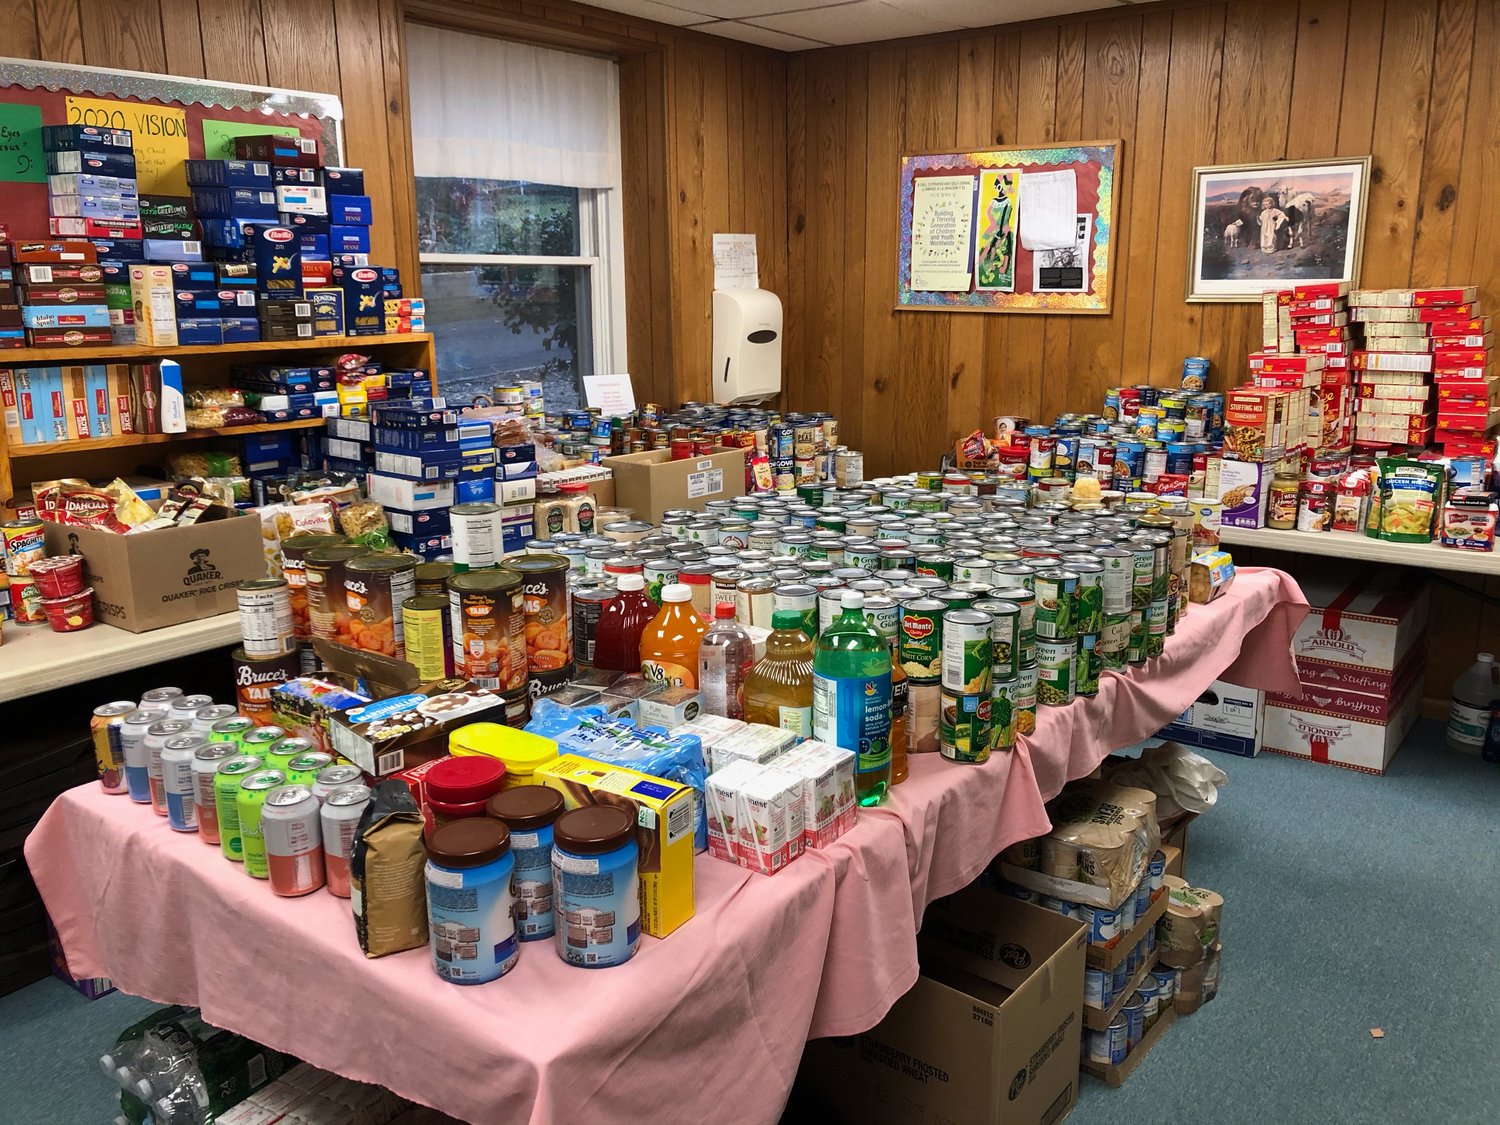 The Mimi Mernin Food Pantry collects and distributes food to families in need across the North Shore.